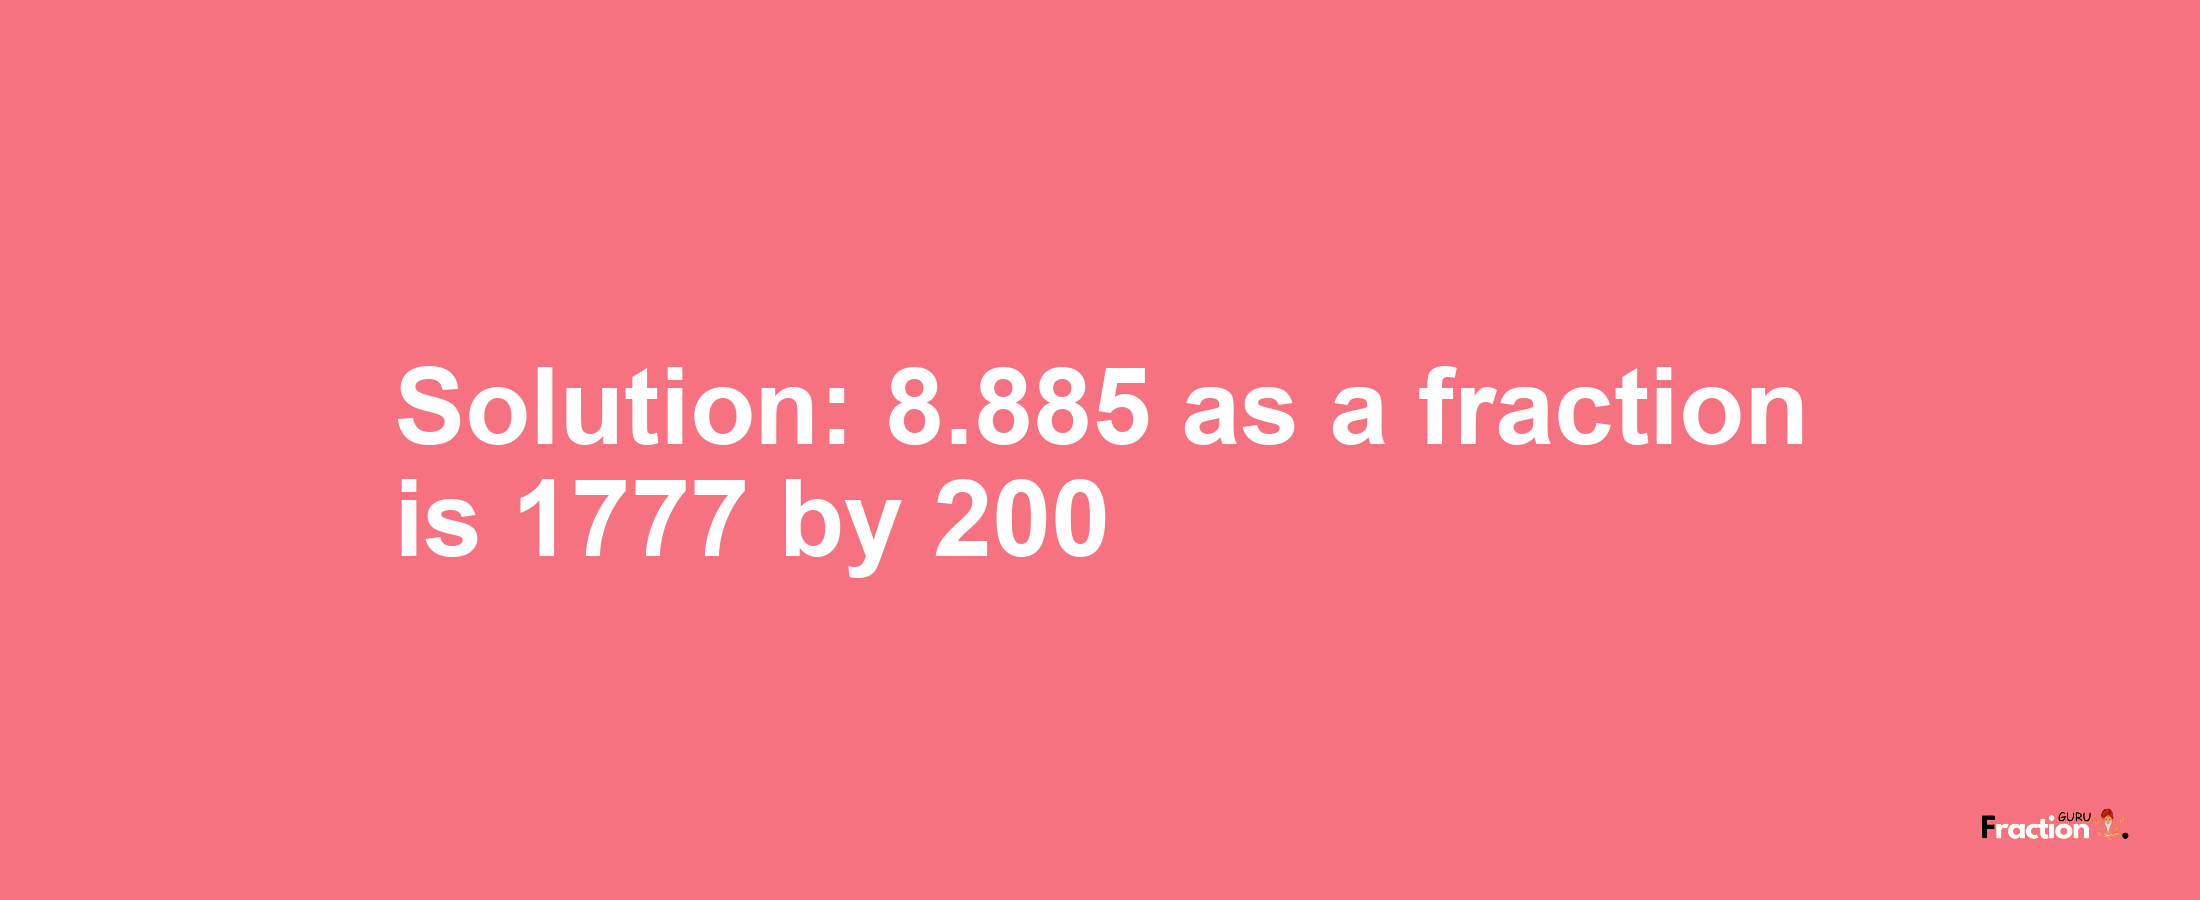 Solution:8.885 as a fraction is 1777/200